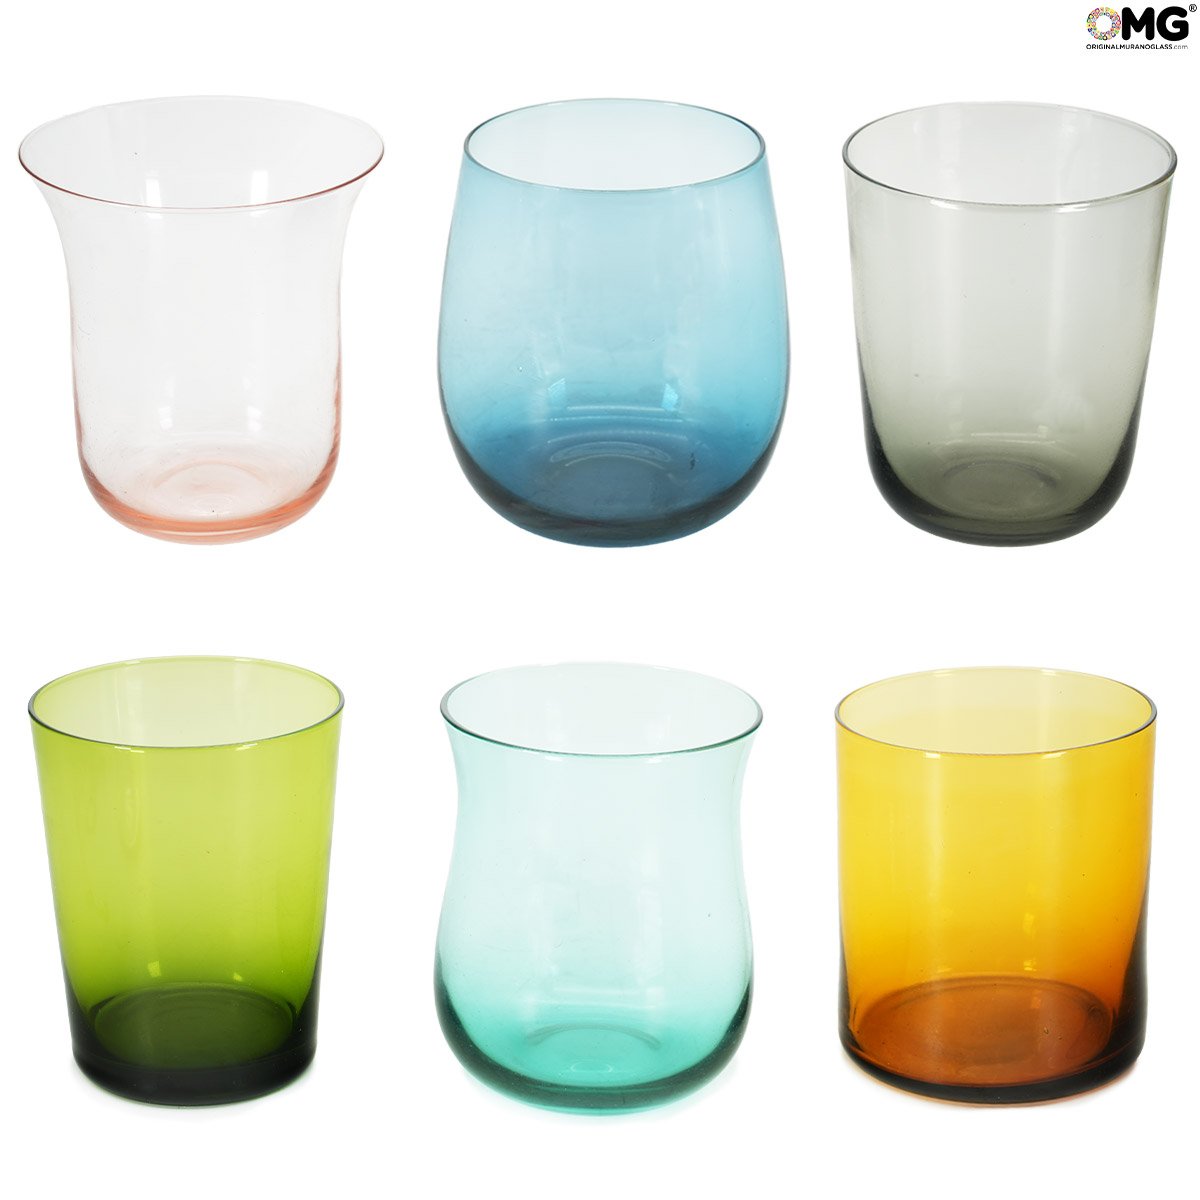 Drinking Glasses Tumblers Murano Sets: Set of 6 Drinking glasses - Summer -  Original Murano Glass OMG